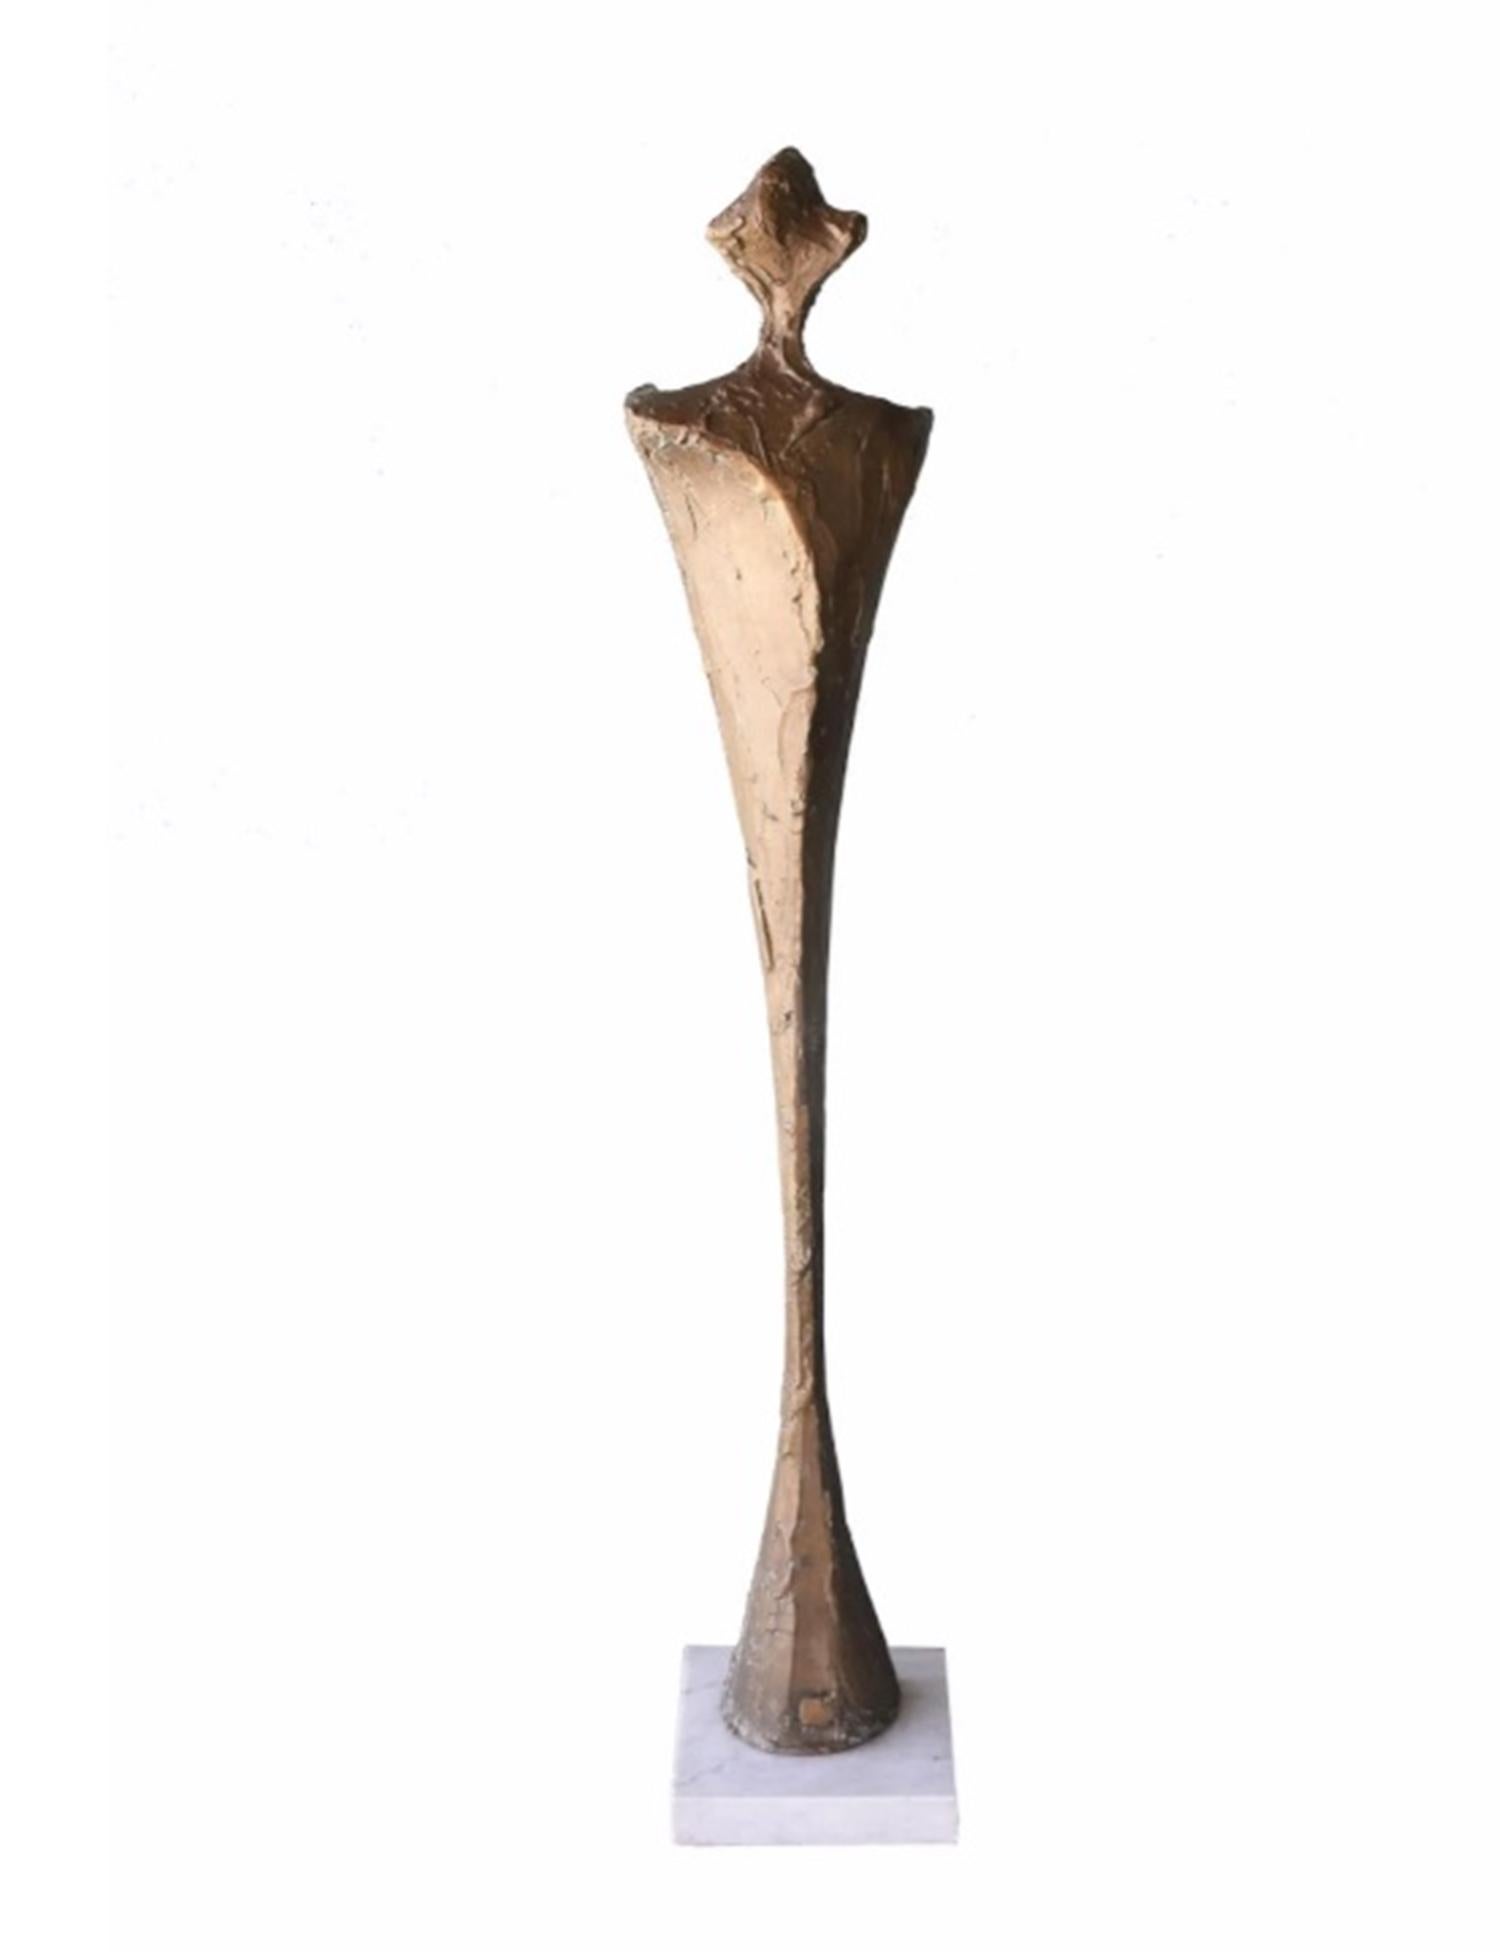 Introducing the breathtaking Bronze Sculpture by Antonio Kieff Grediaga, Signed & Numbered 1/6. 

The piece is titled 